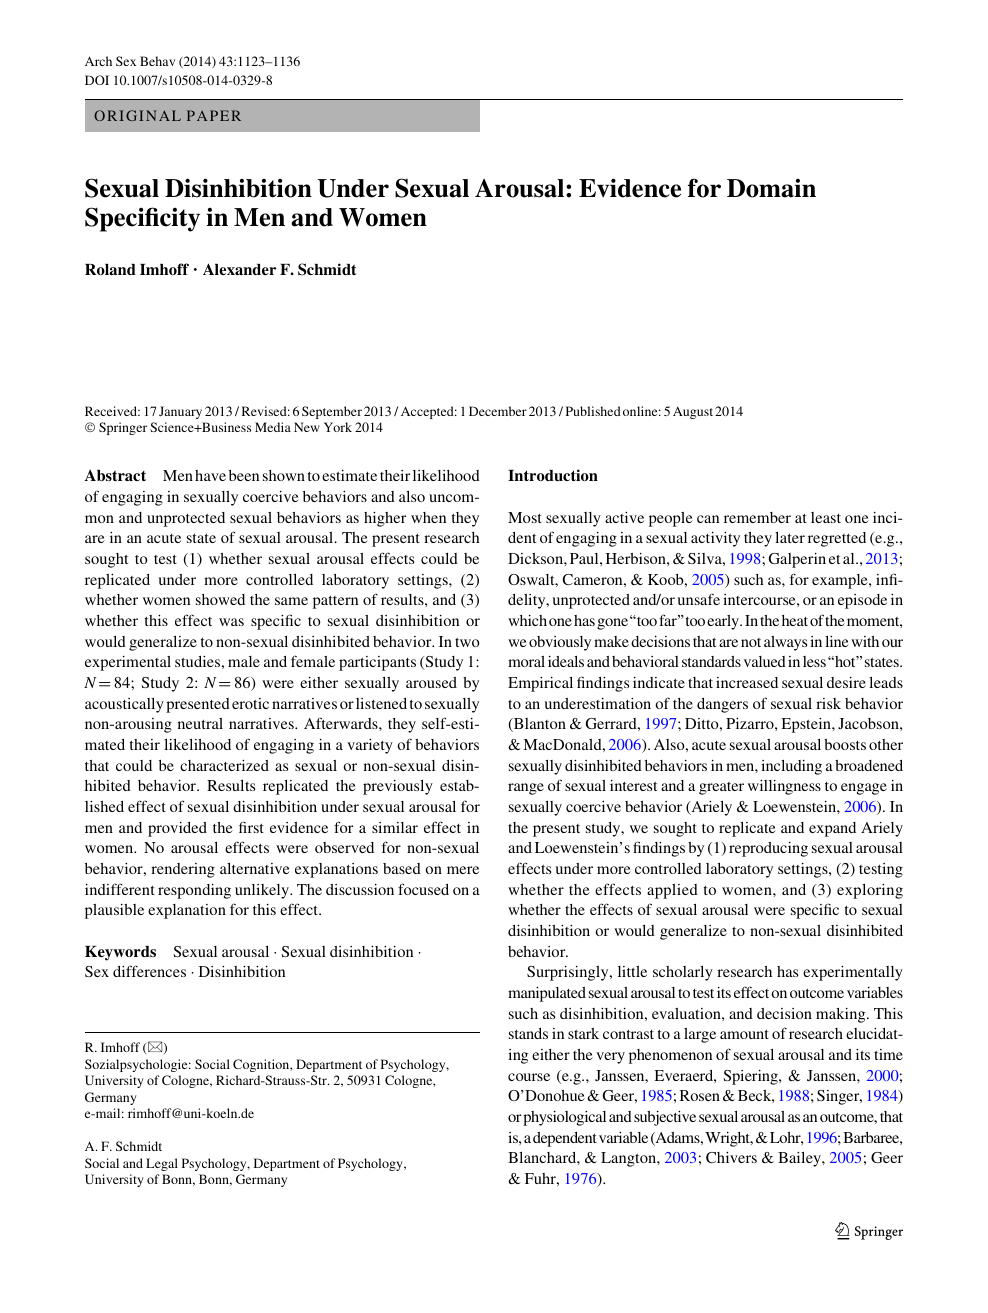 Sexual Disinhibition Under Sexual Arousal Evidence for Domain Specificity in Men and Women